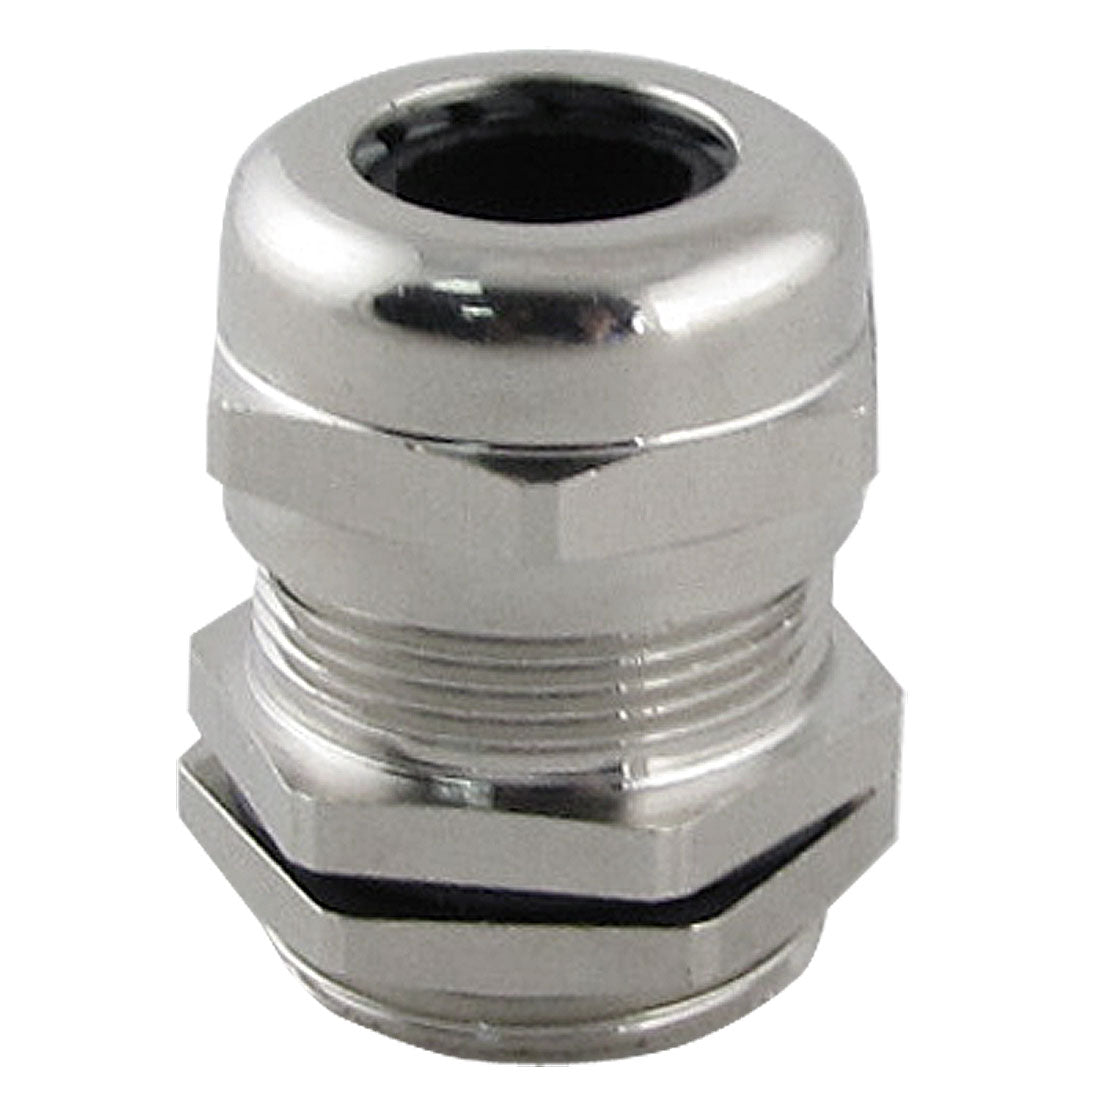 uxcell Uxcell Stainless Steel 6.0-12.0mm M20 Cable Gland Connector with Locknut